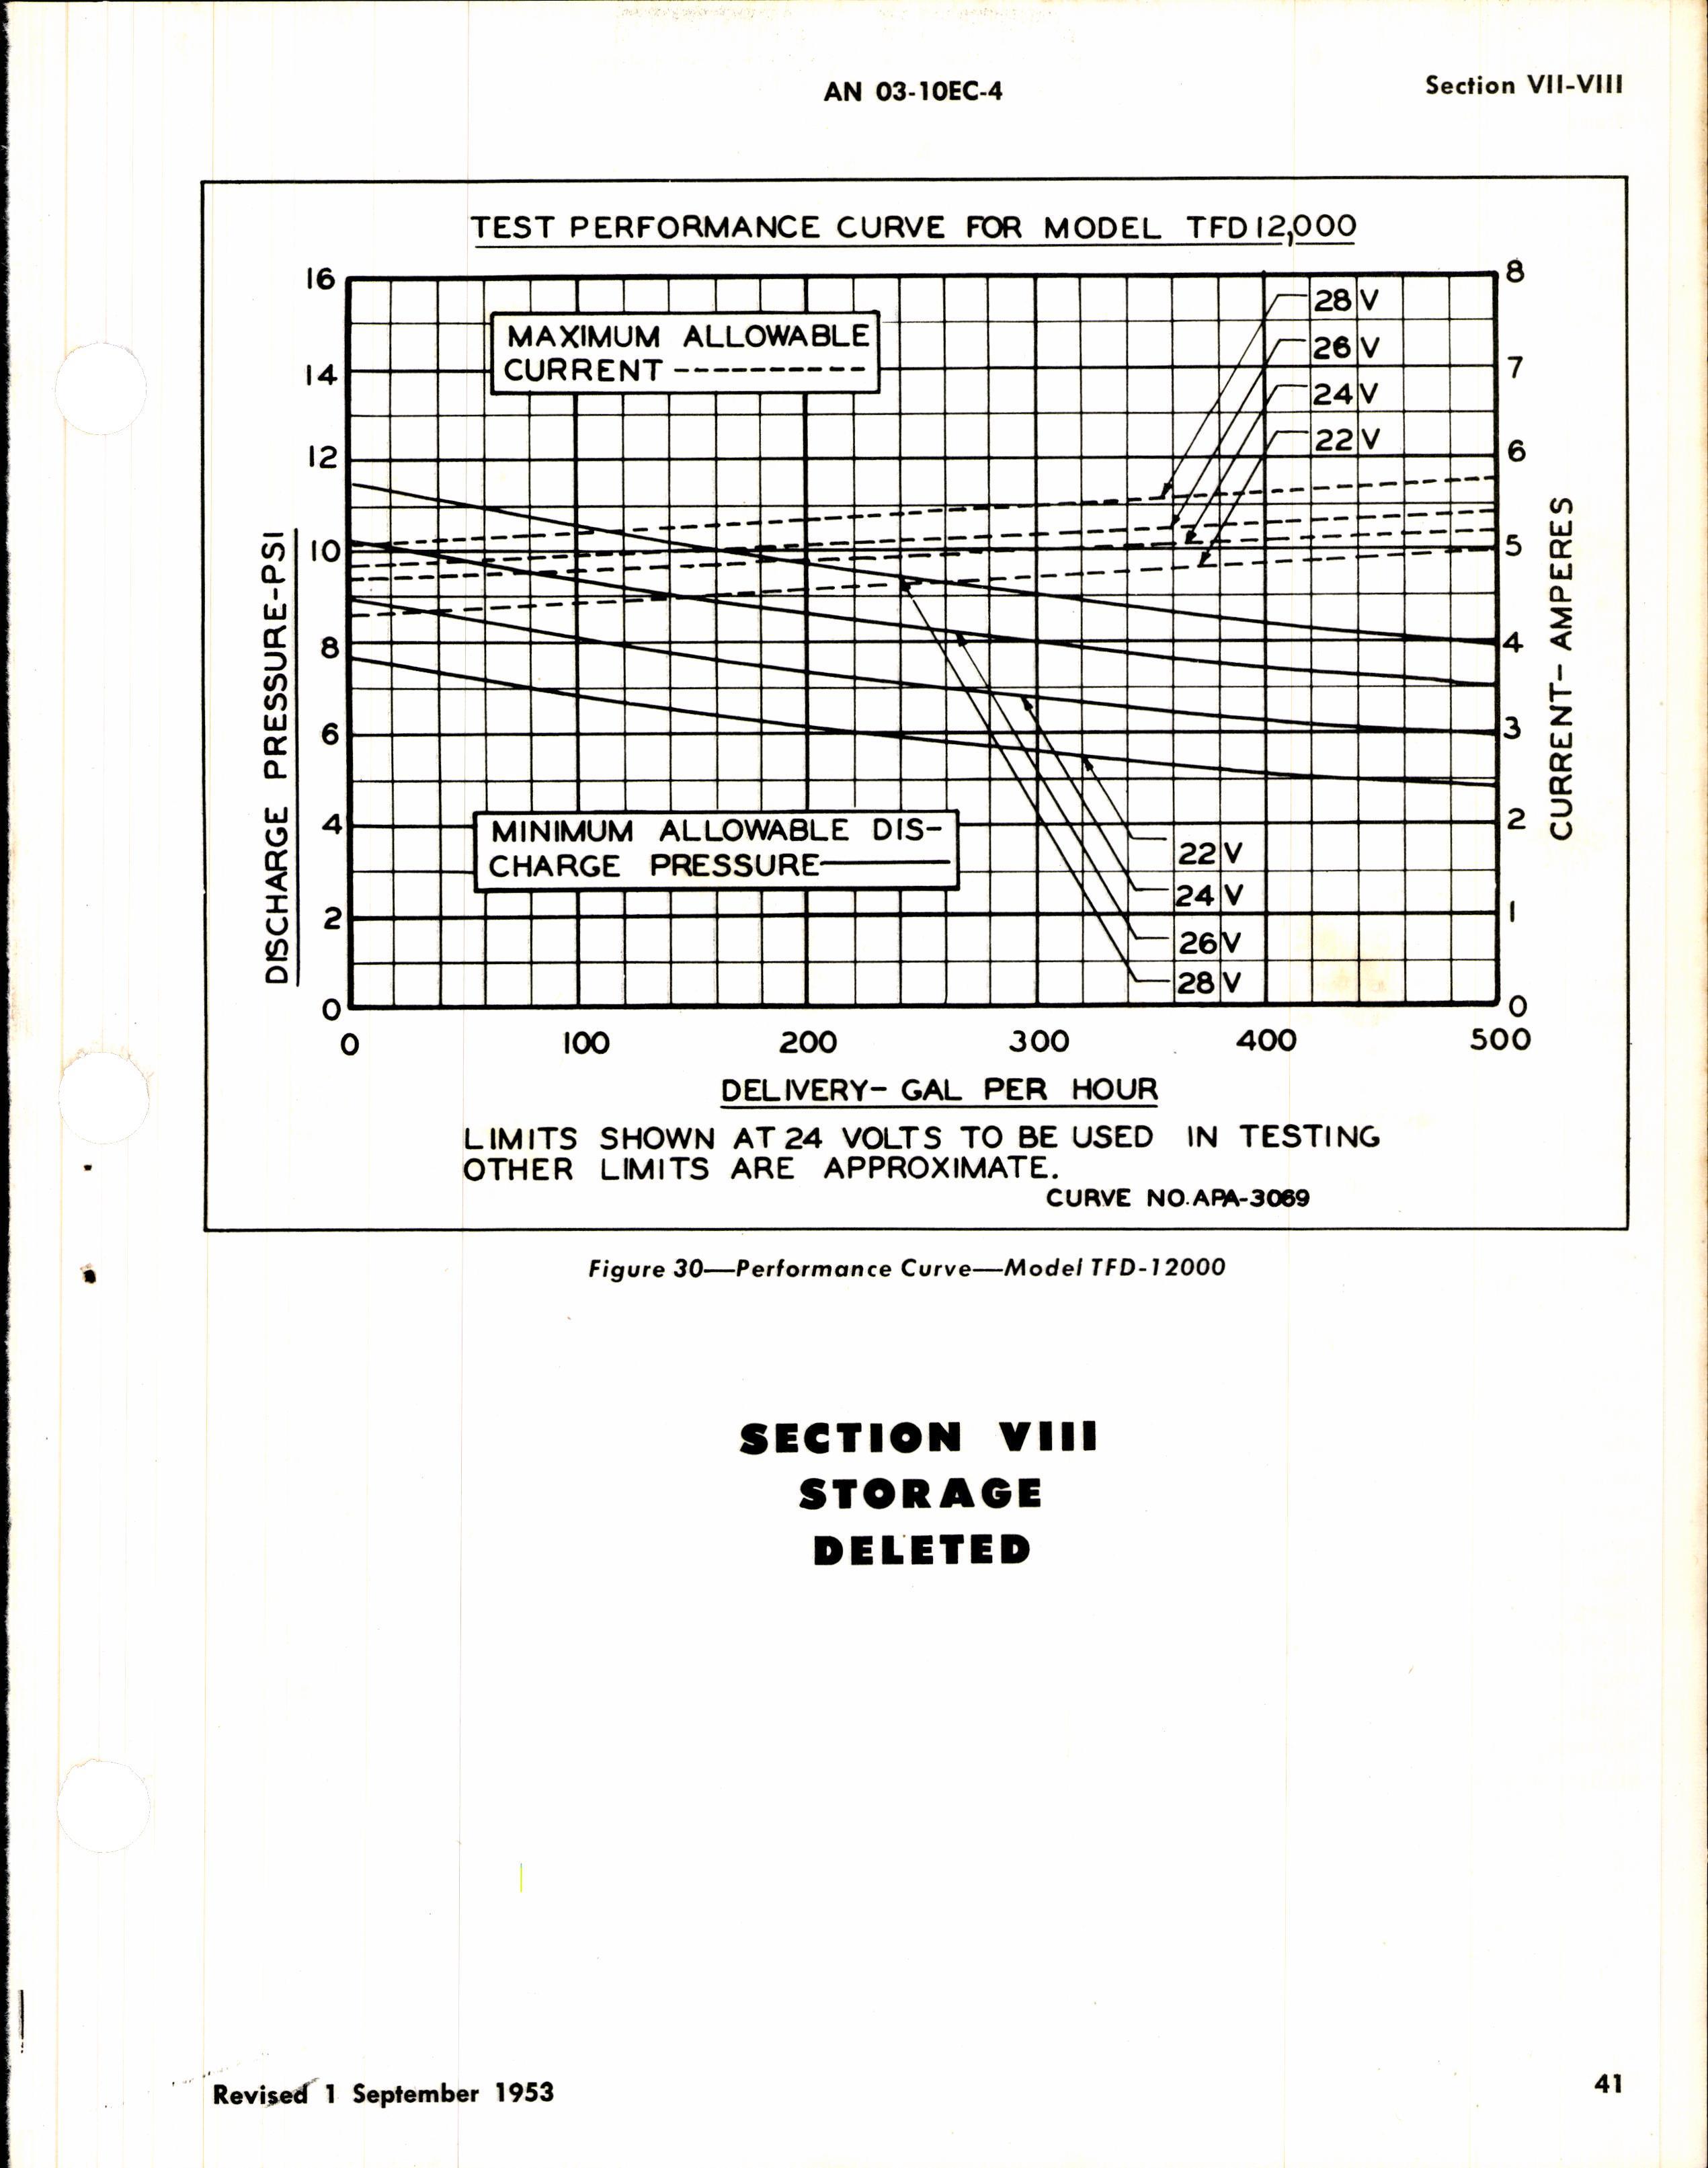 Sample page 5 from AirCorps Library document: Operation, Service, & Overhaul Instructions with Parts Catalog for Thompson Fuel Booster Pumps